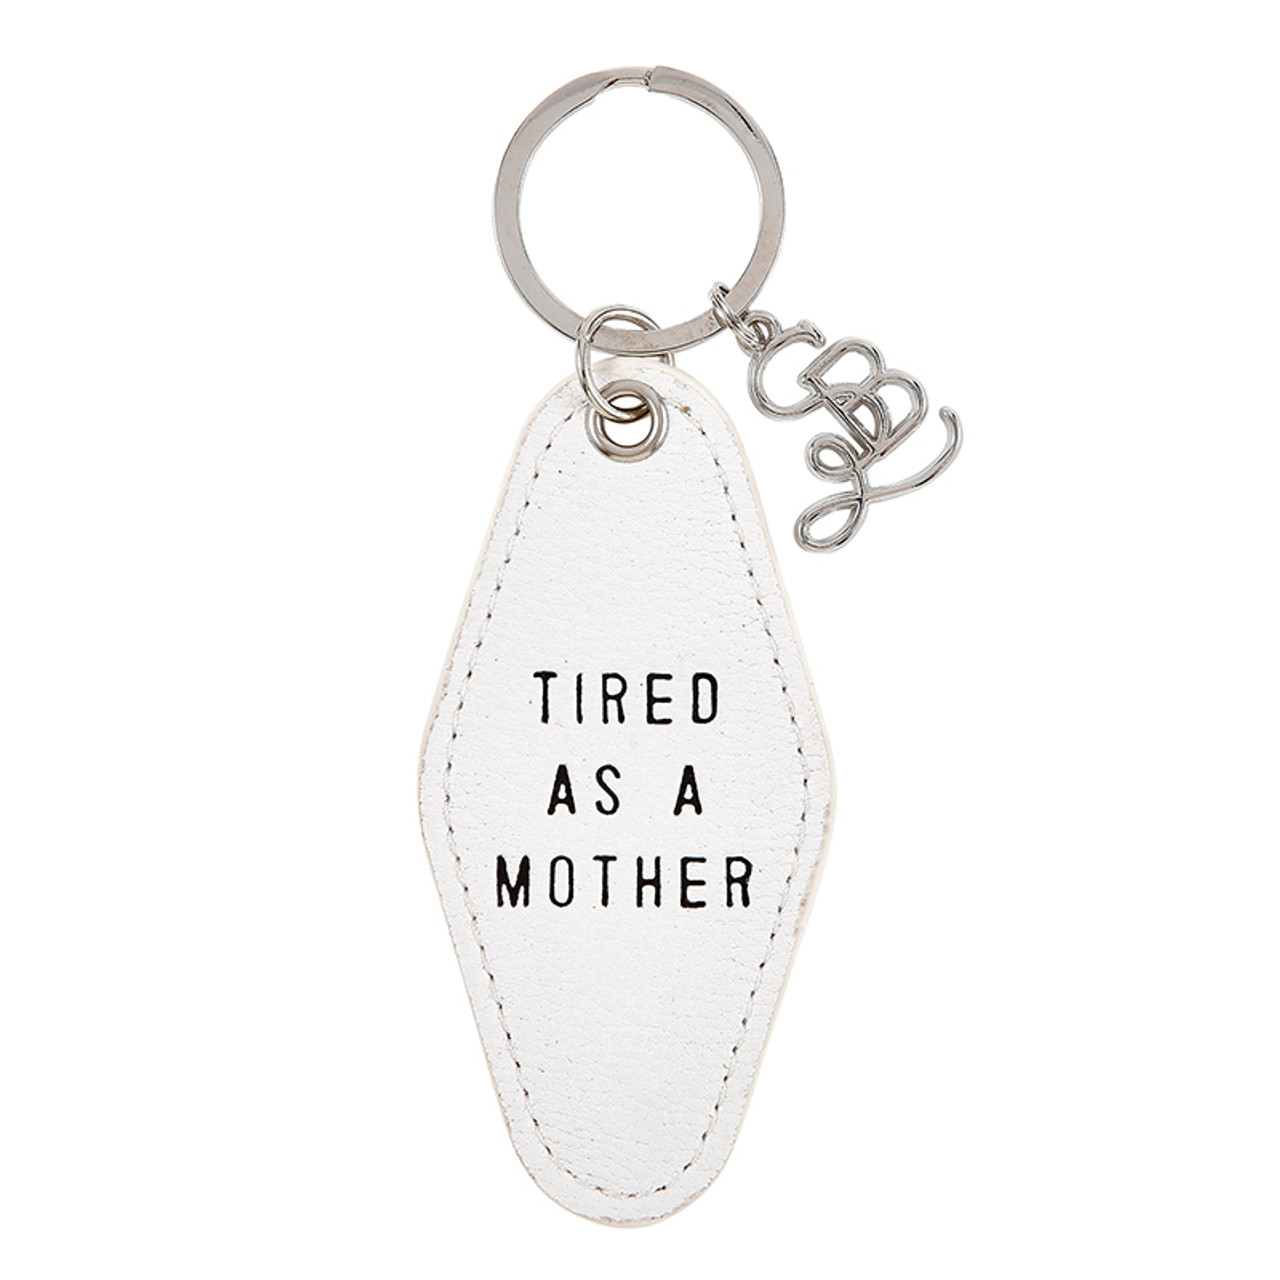 Face to Face Leather Motel Key Tag - Tired As A Mother - Santa